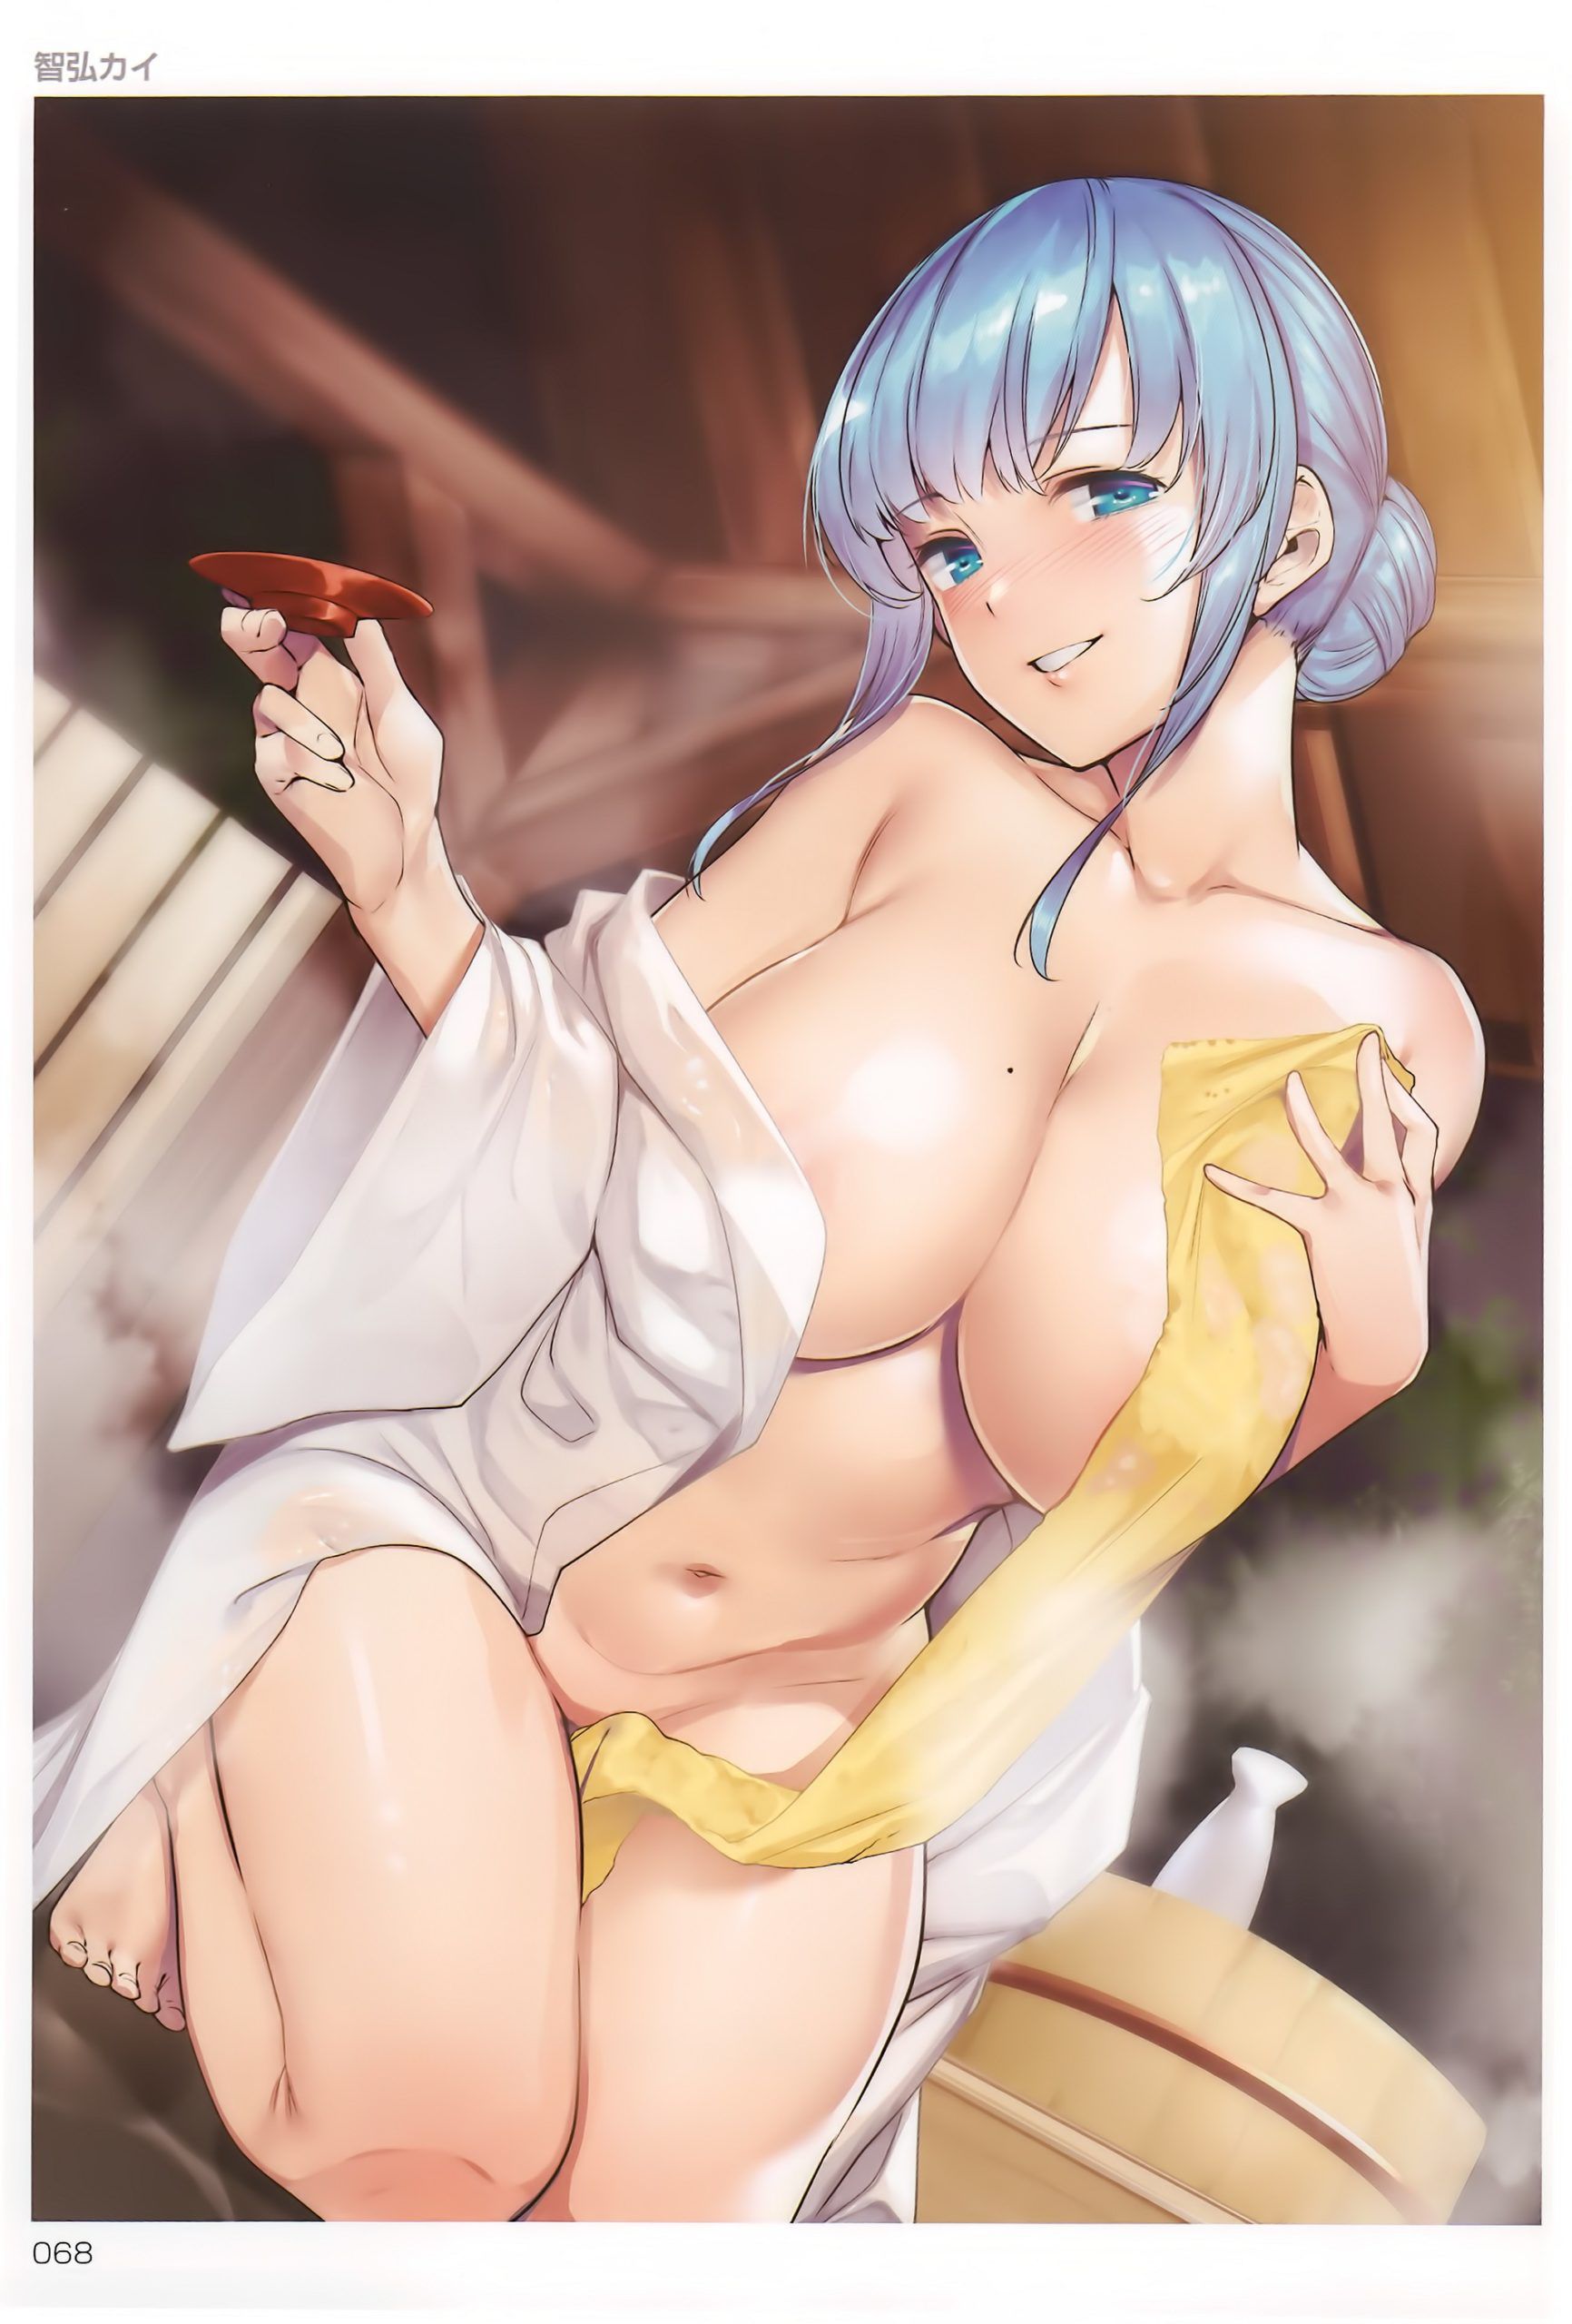 Erotic image of "blue hair beauty" that does not exist in reality even if it is a staple of water attribute character in fantasy 52